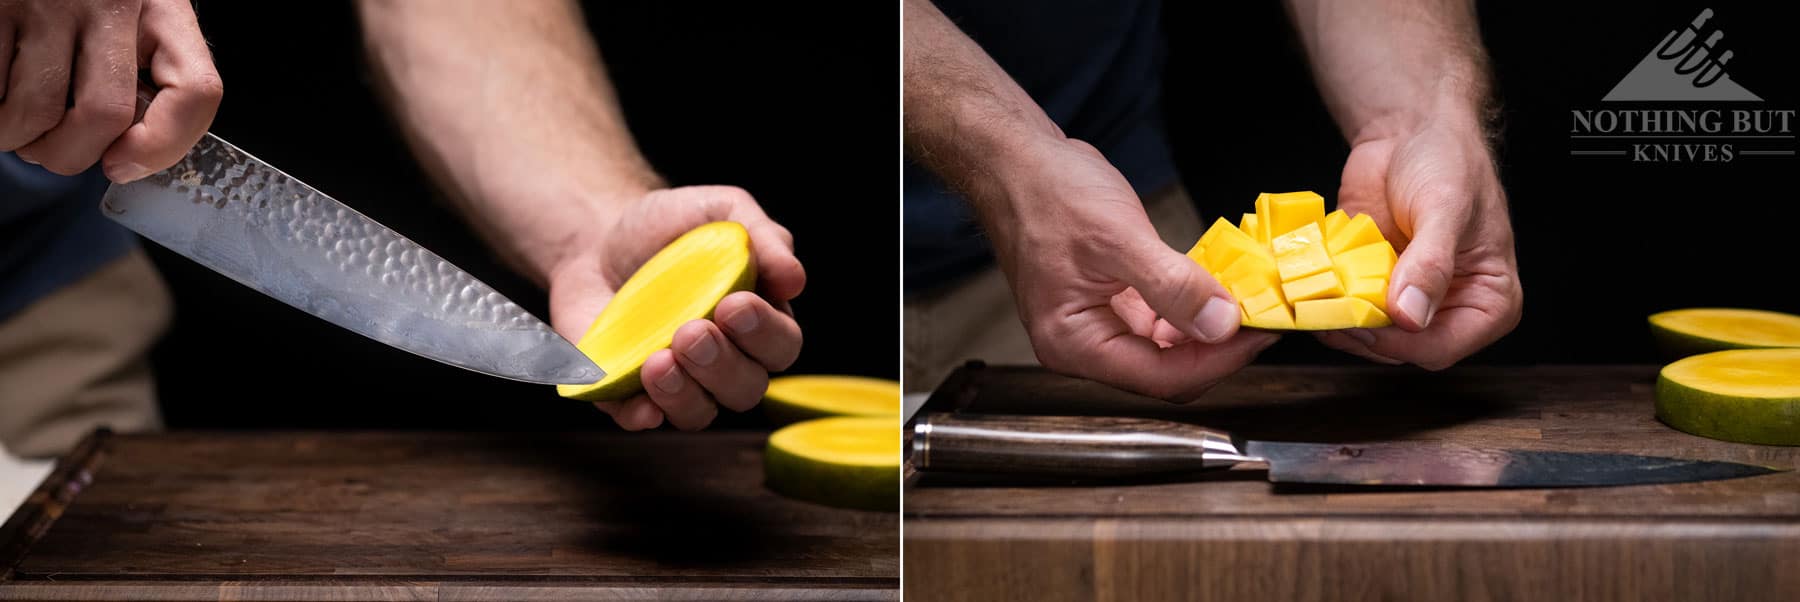 This two image montage shows the Shun Premier chef knife being used to dice a Mango with the skin still attached.